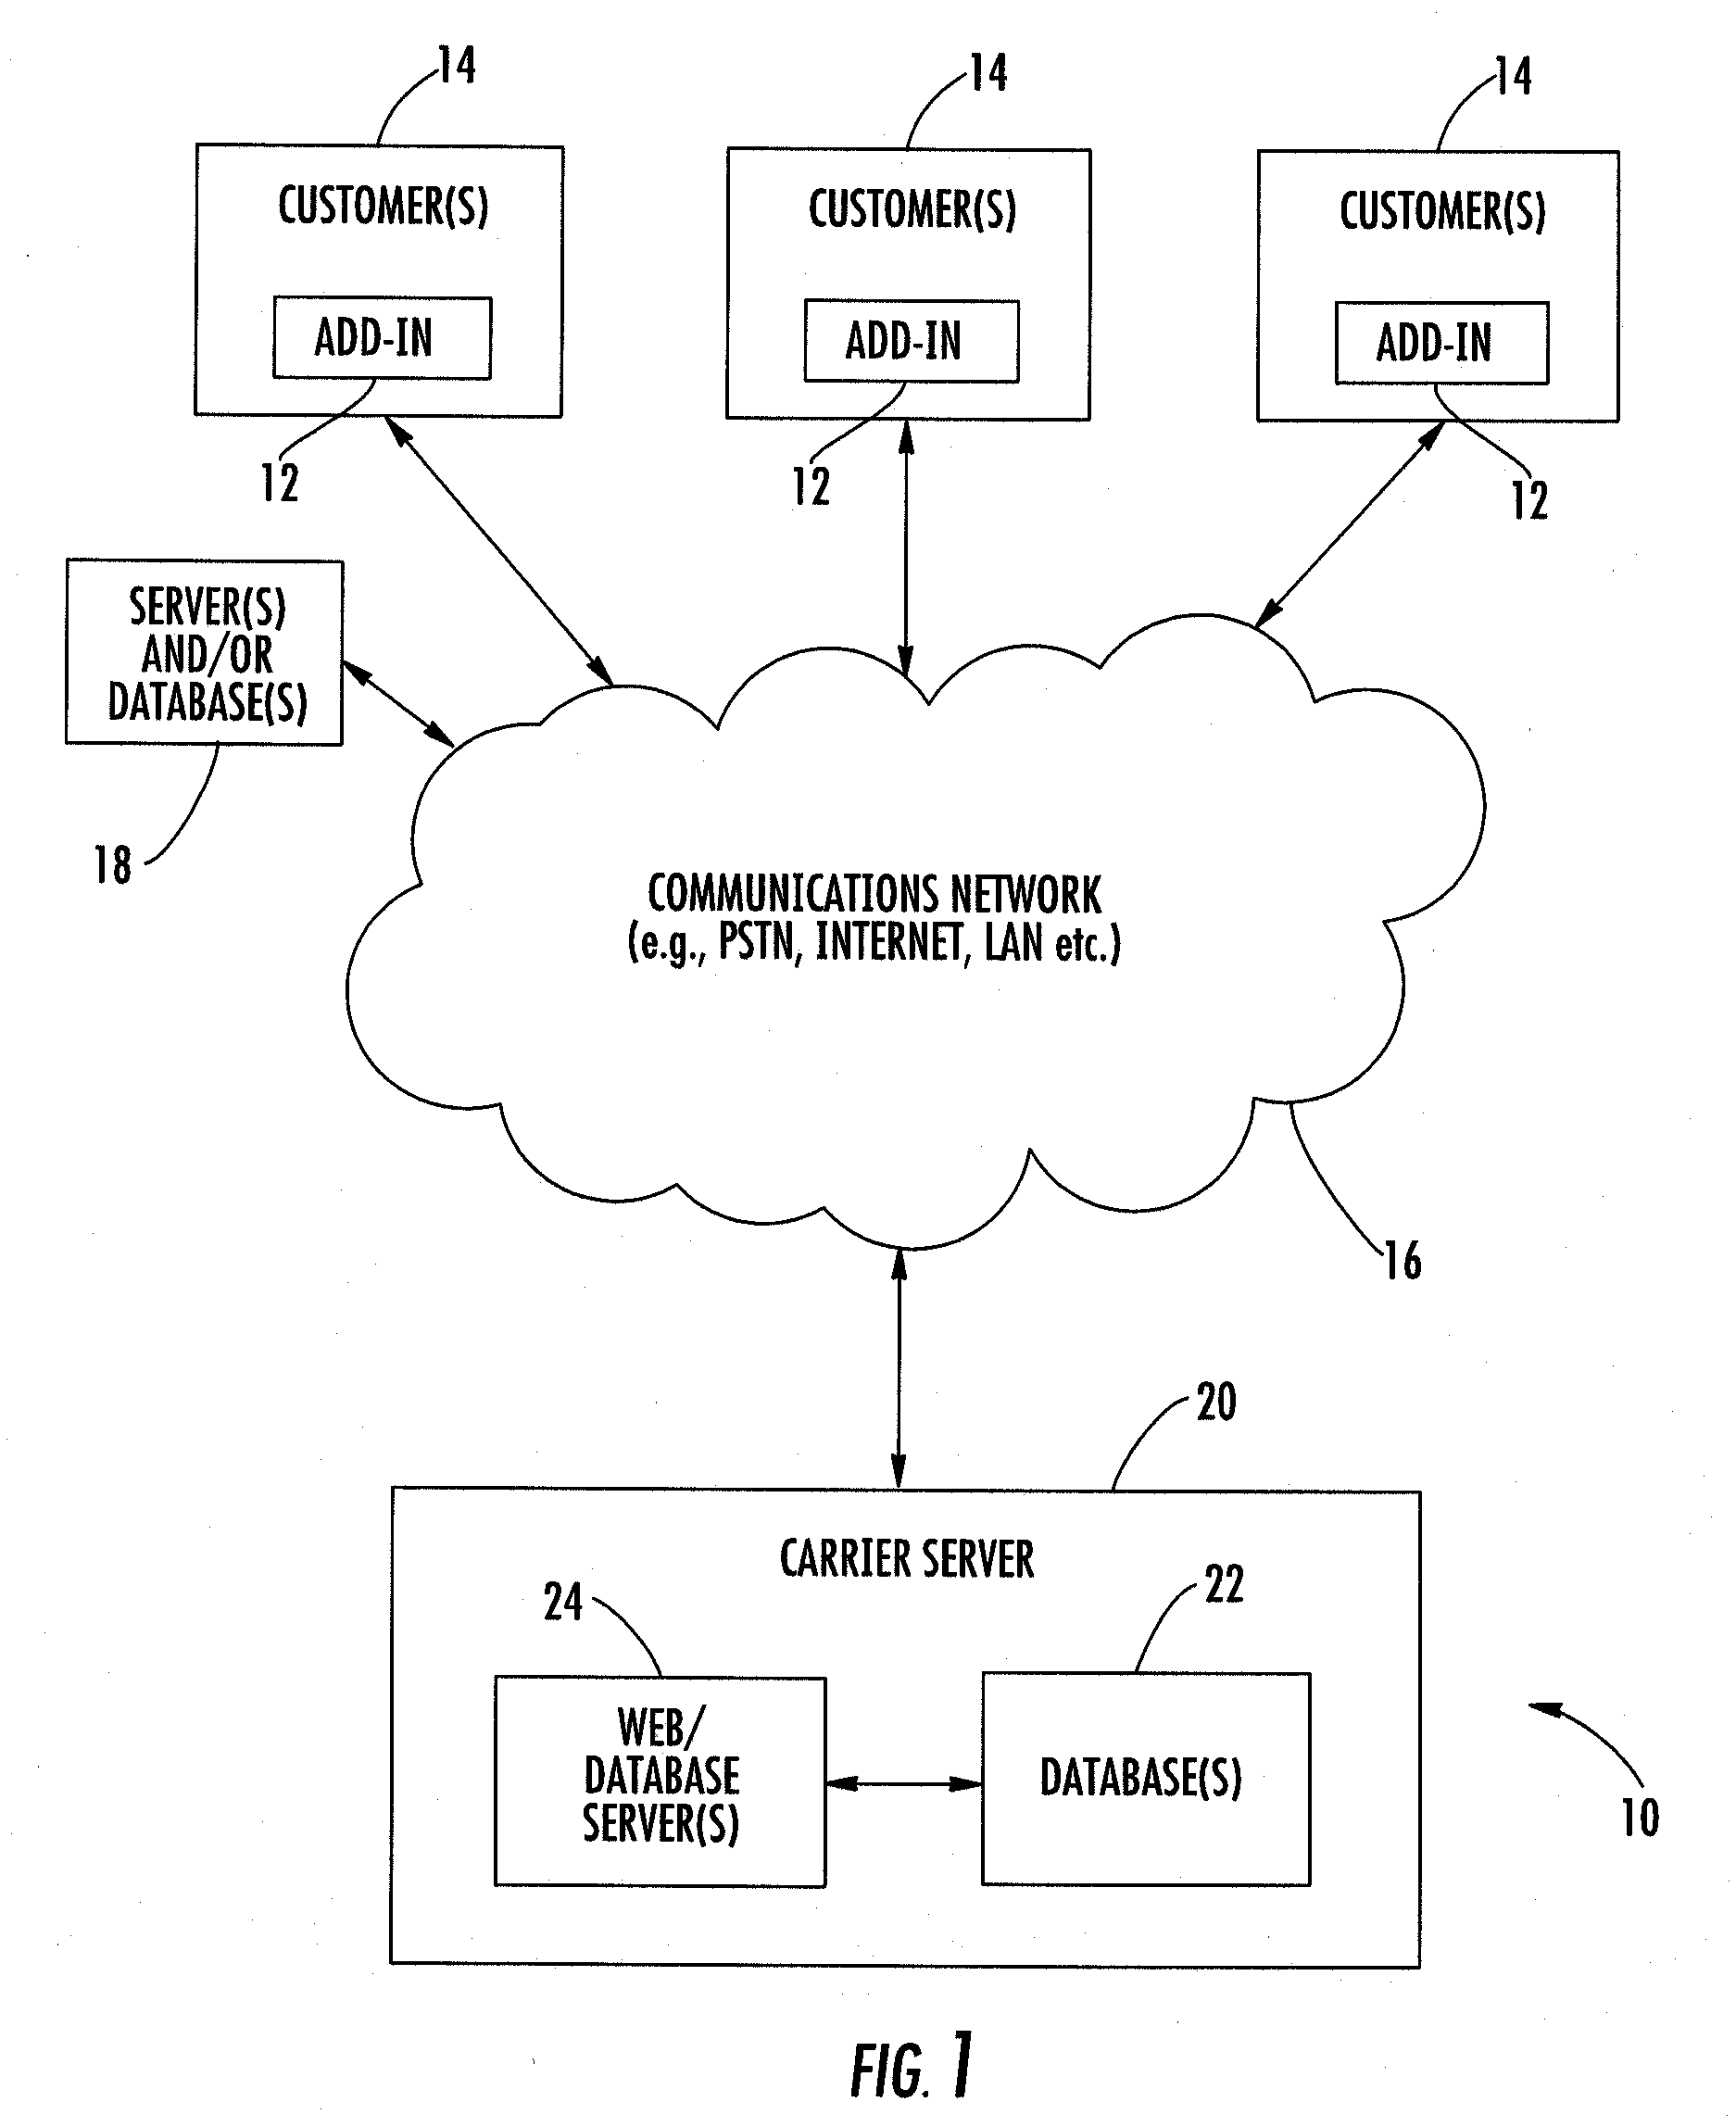 Method and System for Add-in Module for Obtaining Shipping Information